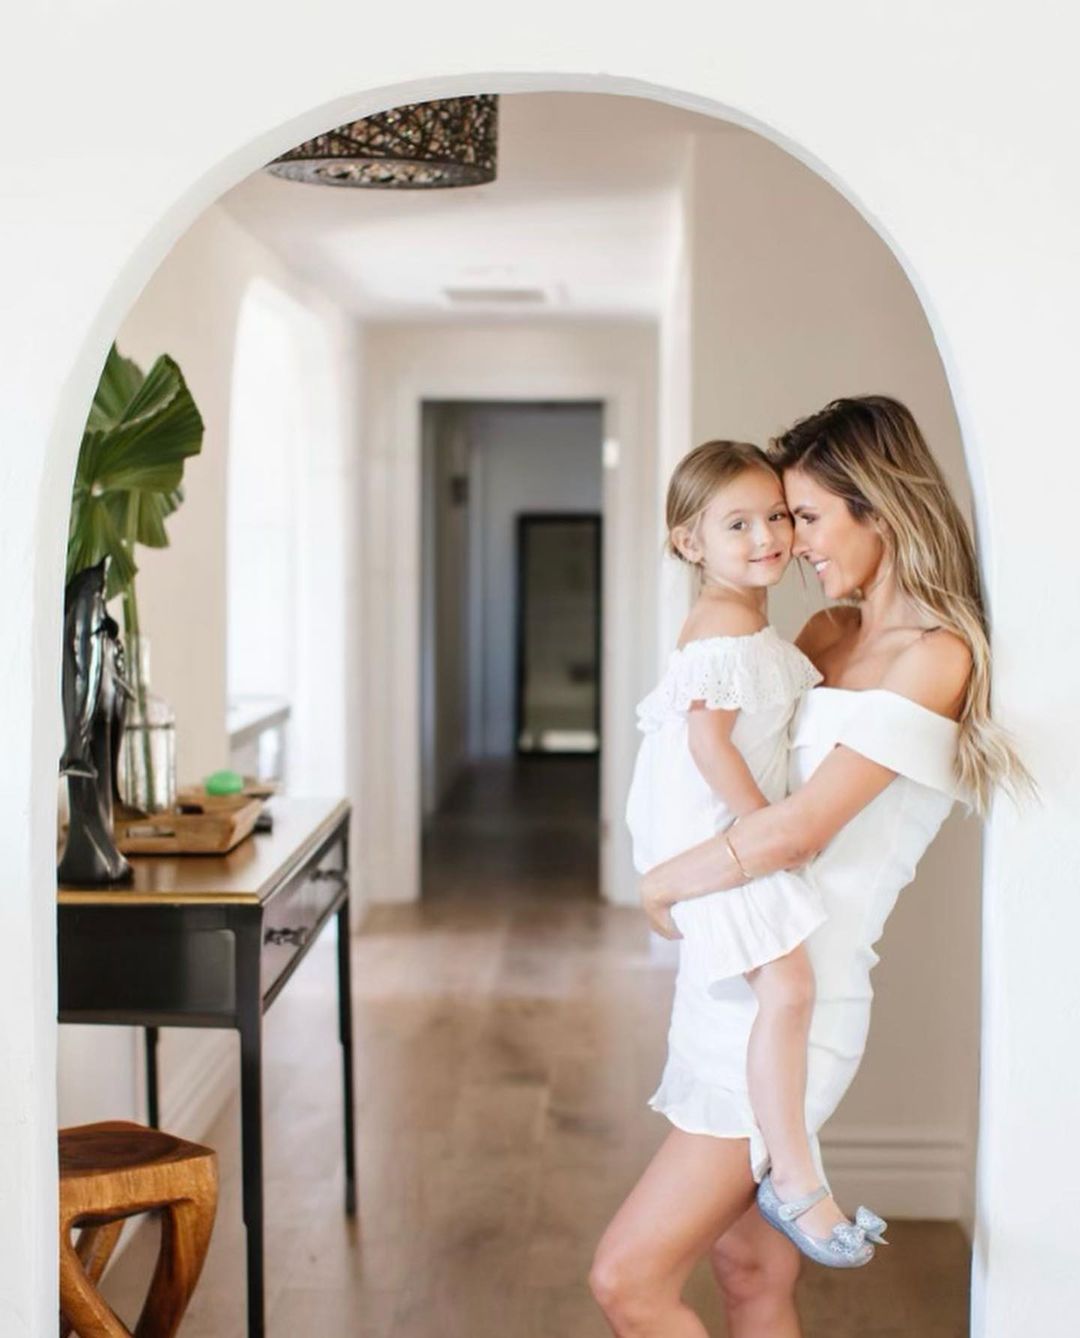 Audrina Patridge with her daughter